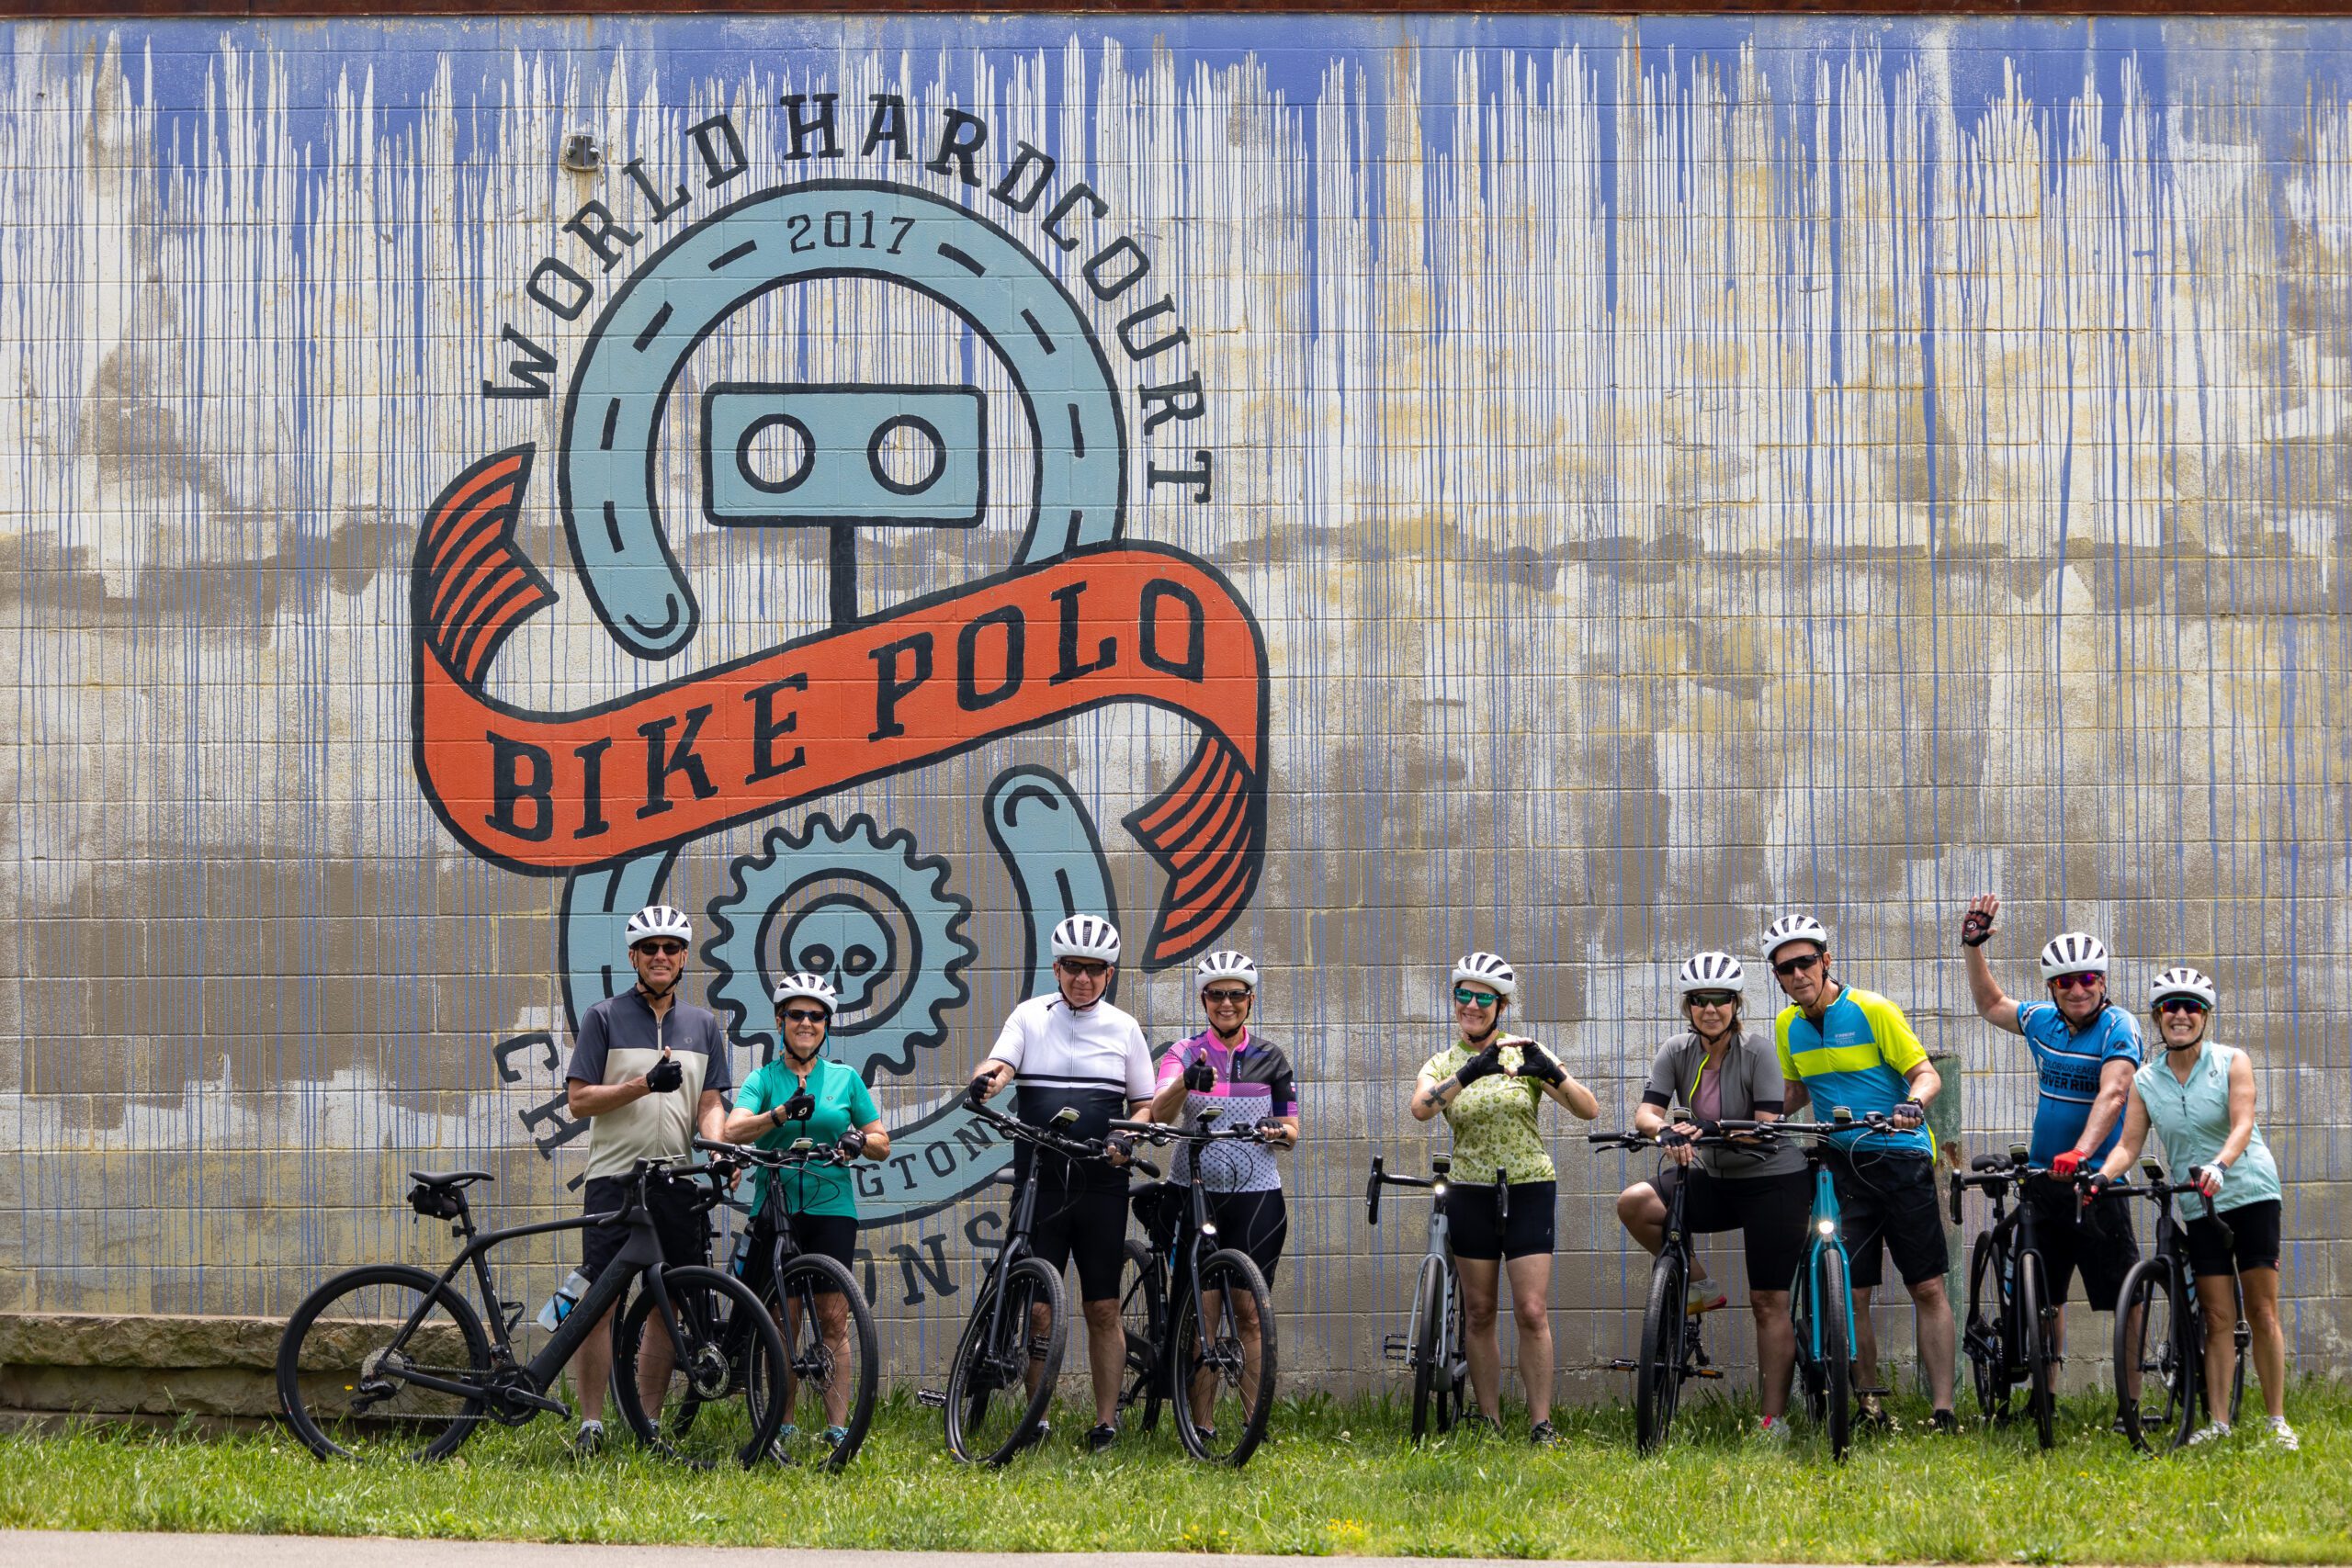 A group of cyclists pose in front of a wall mural